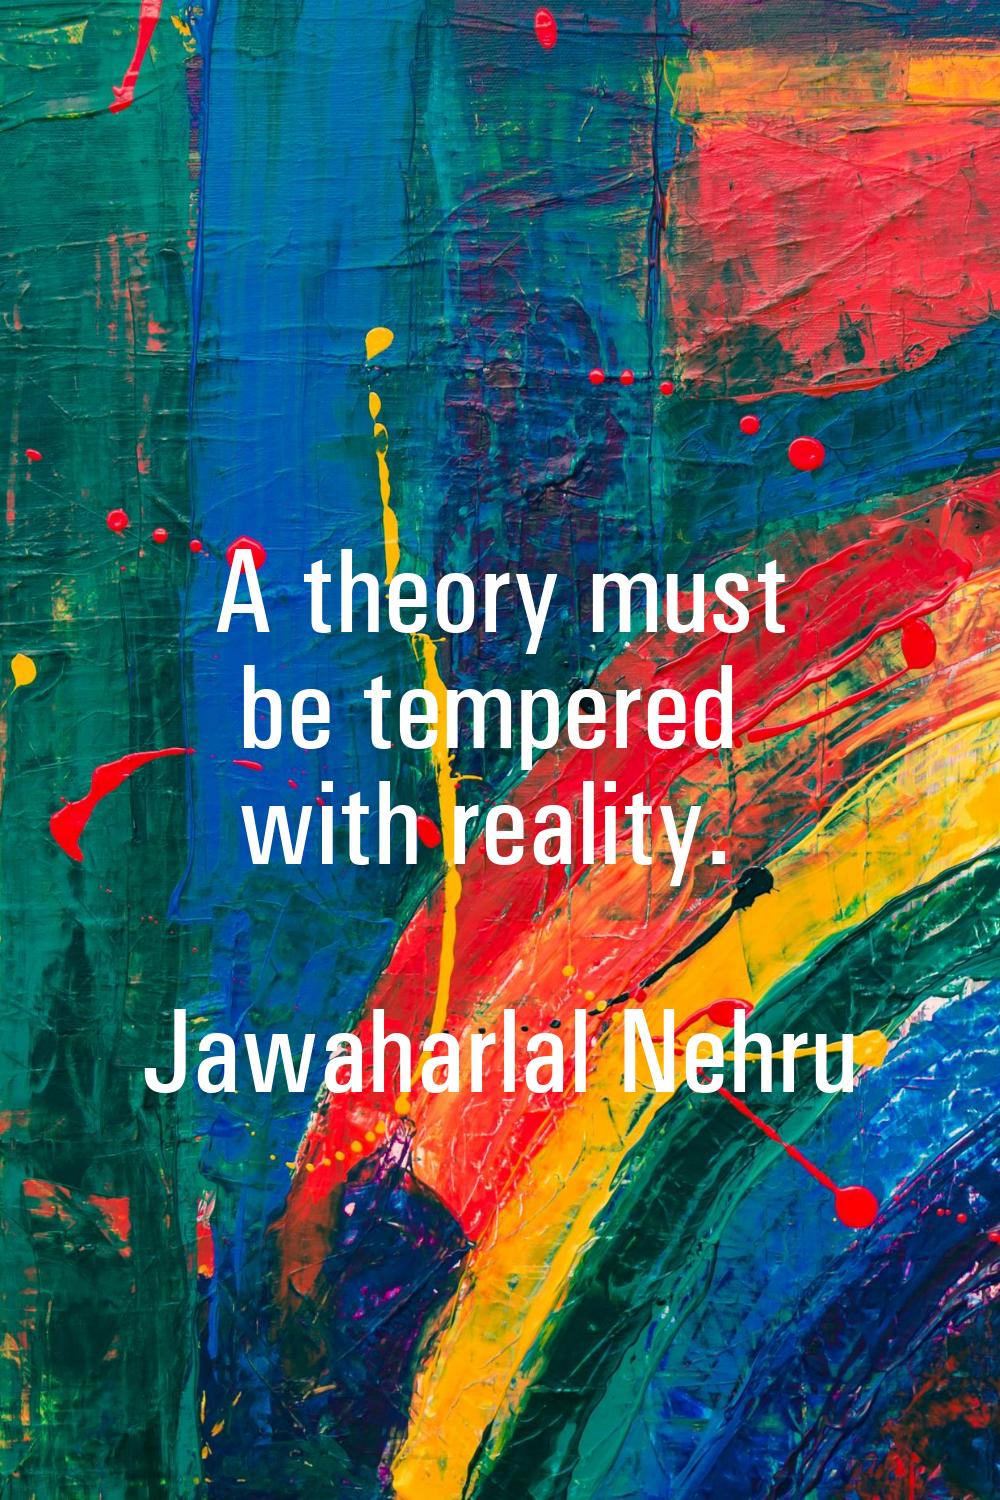 A theory must be tempered with reality.